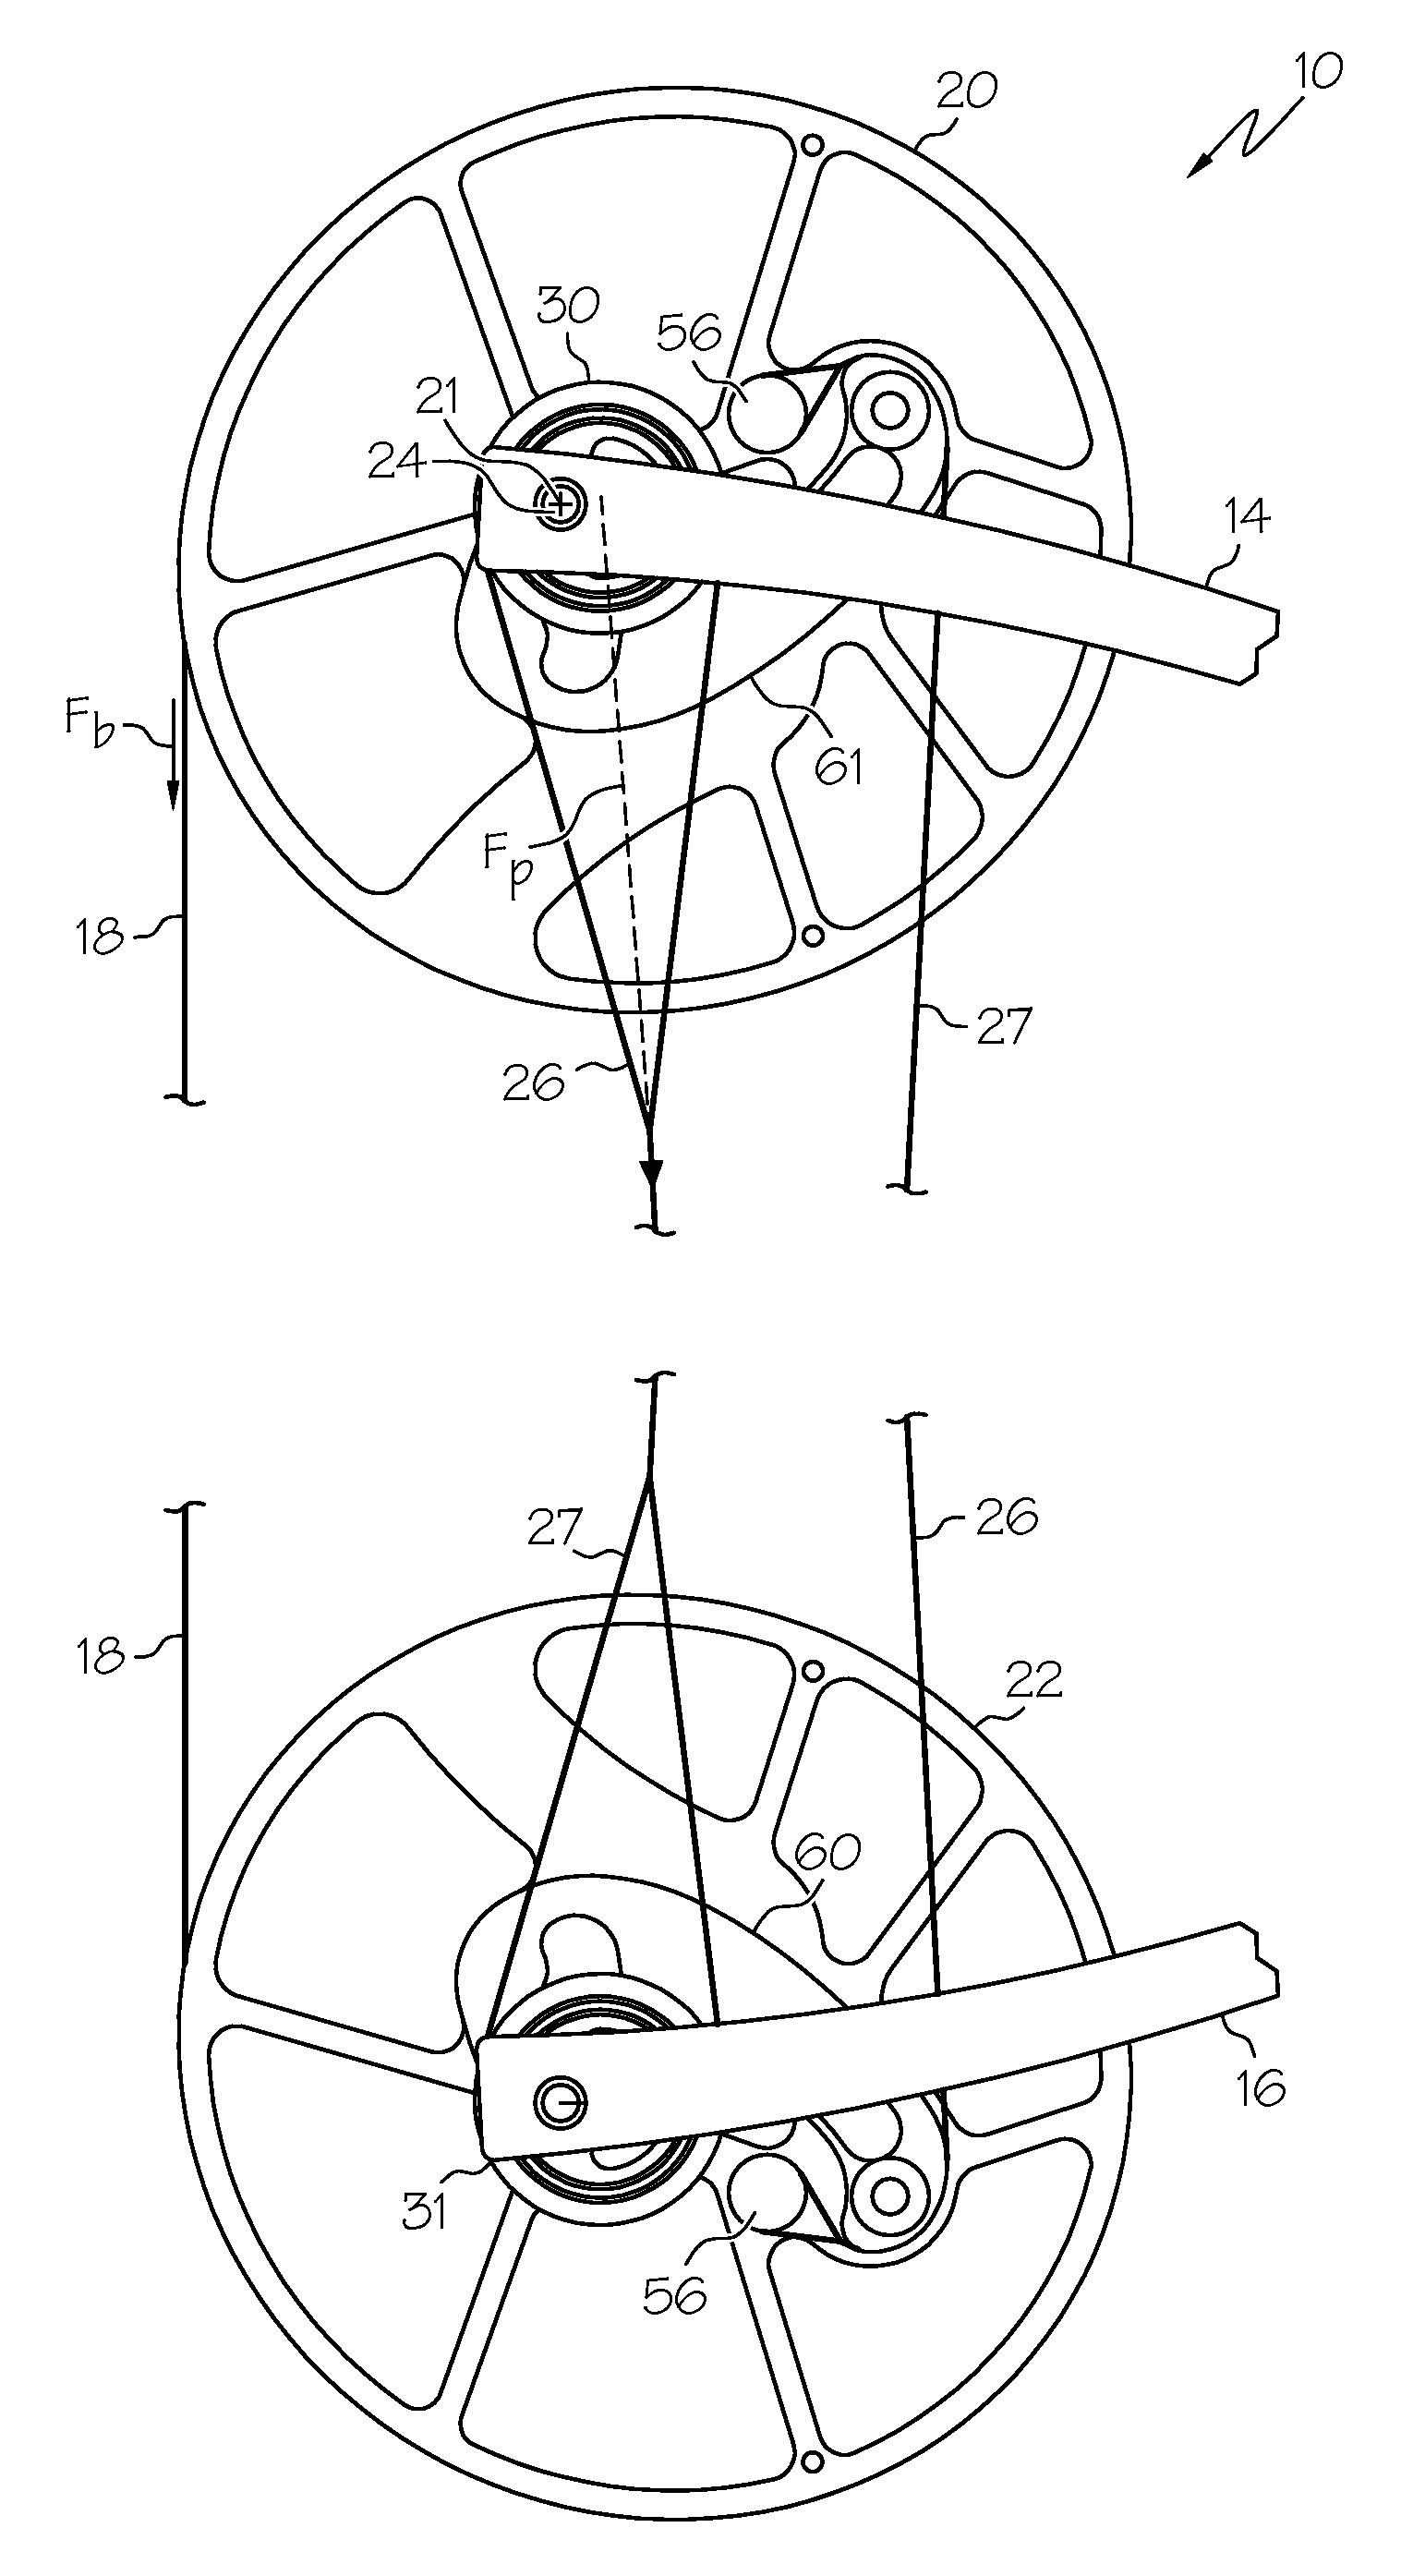 Archery bow with force vectoring anchor